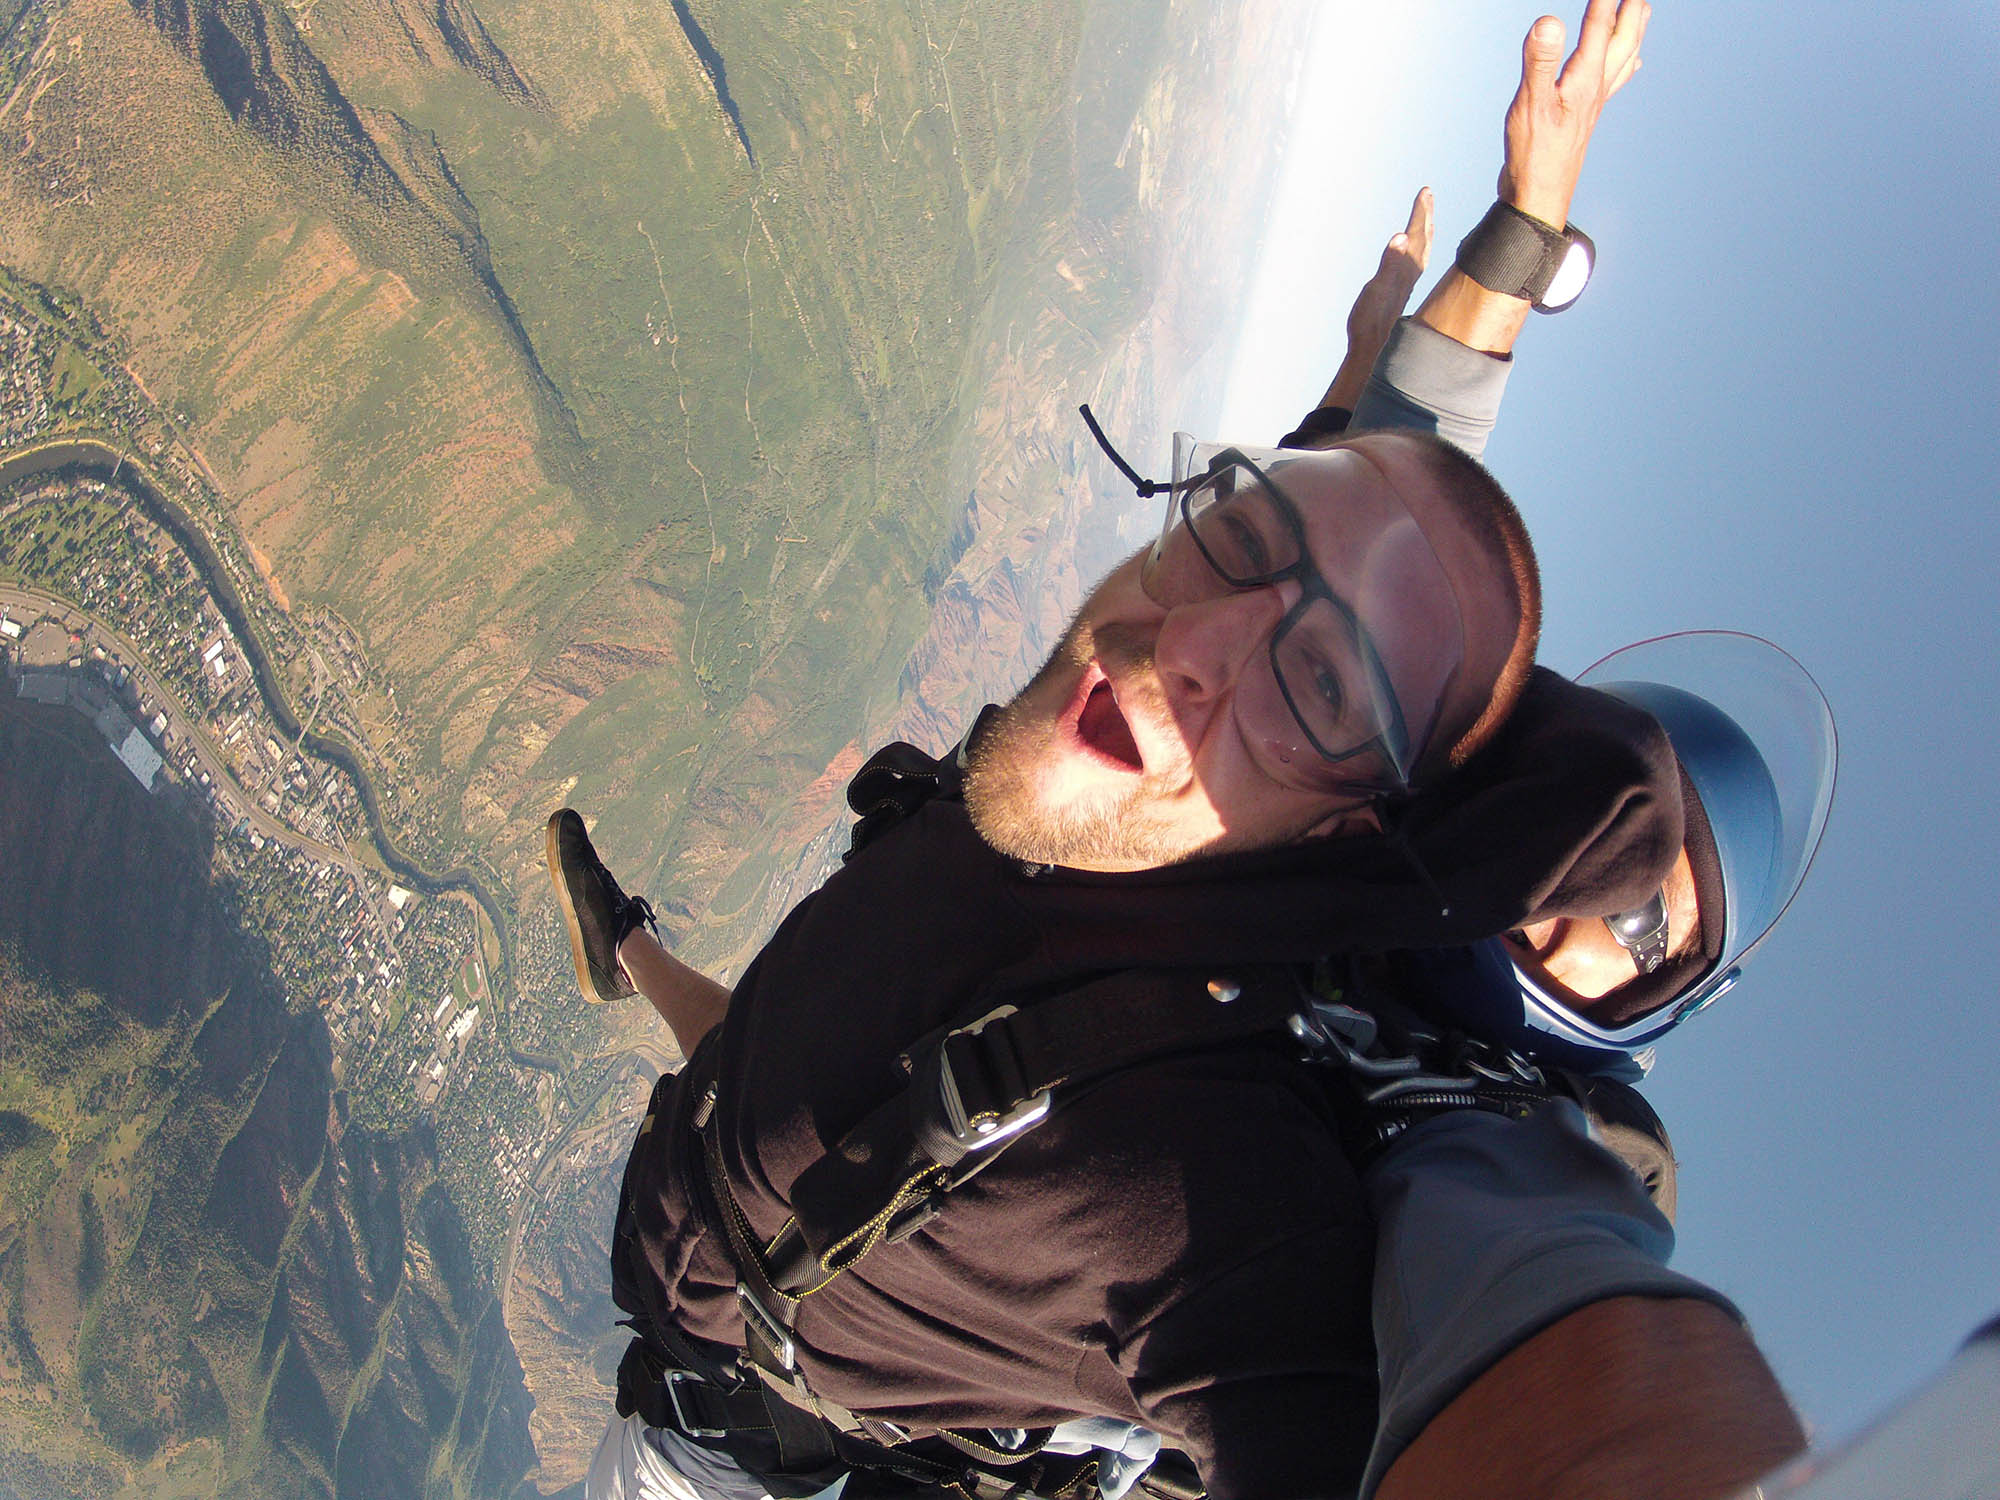 Tandem skydiving with an experienced instructor is a great way to get introduced to the sport